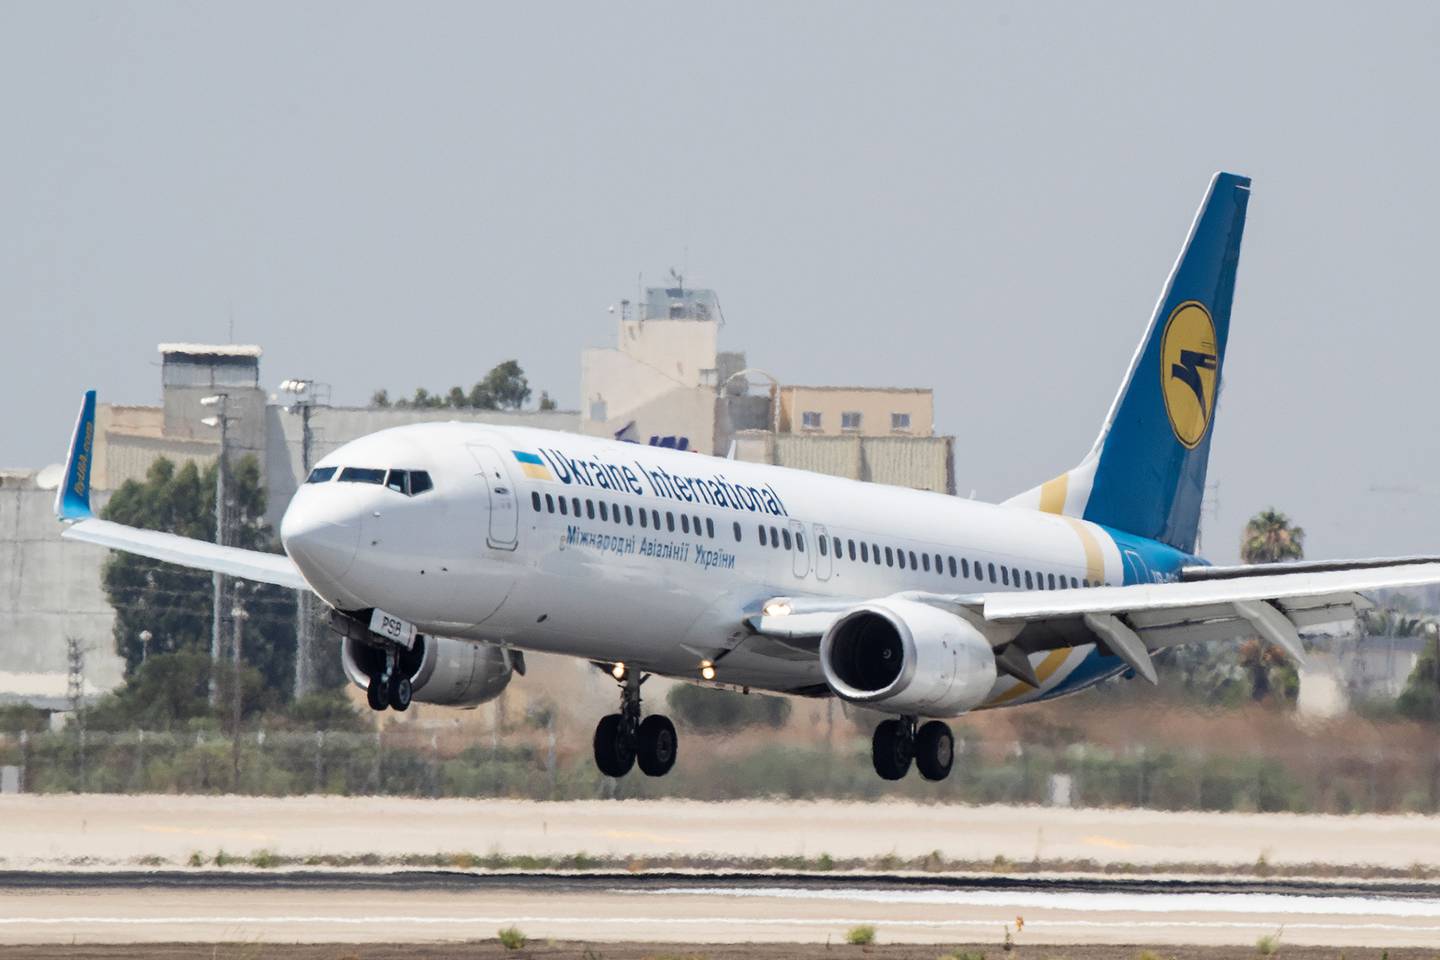 A Boeing 737-3E7 from Ukraine International Airlines